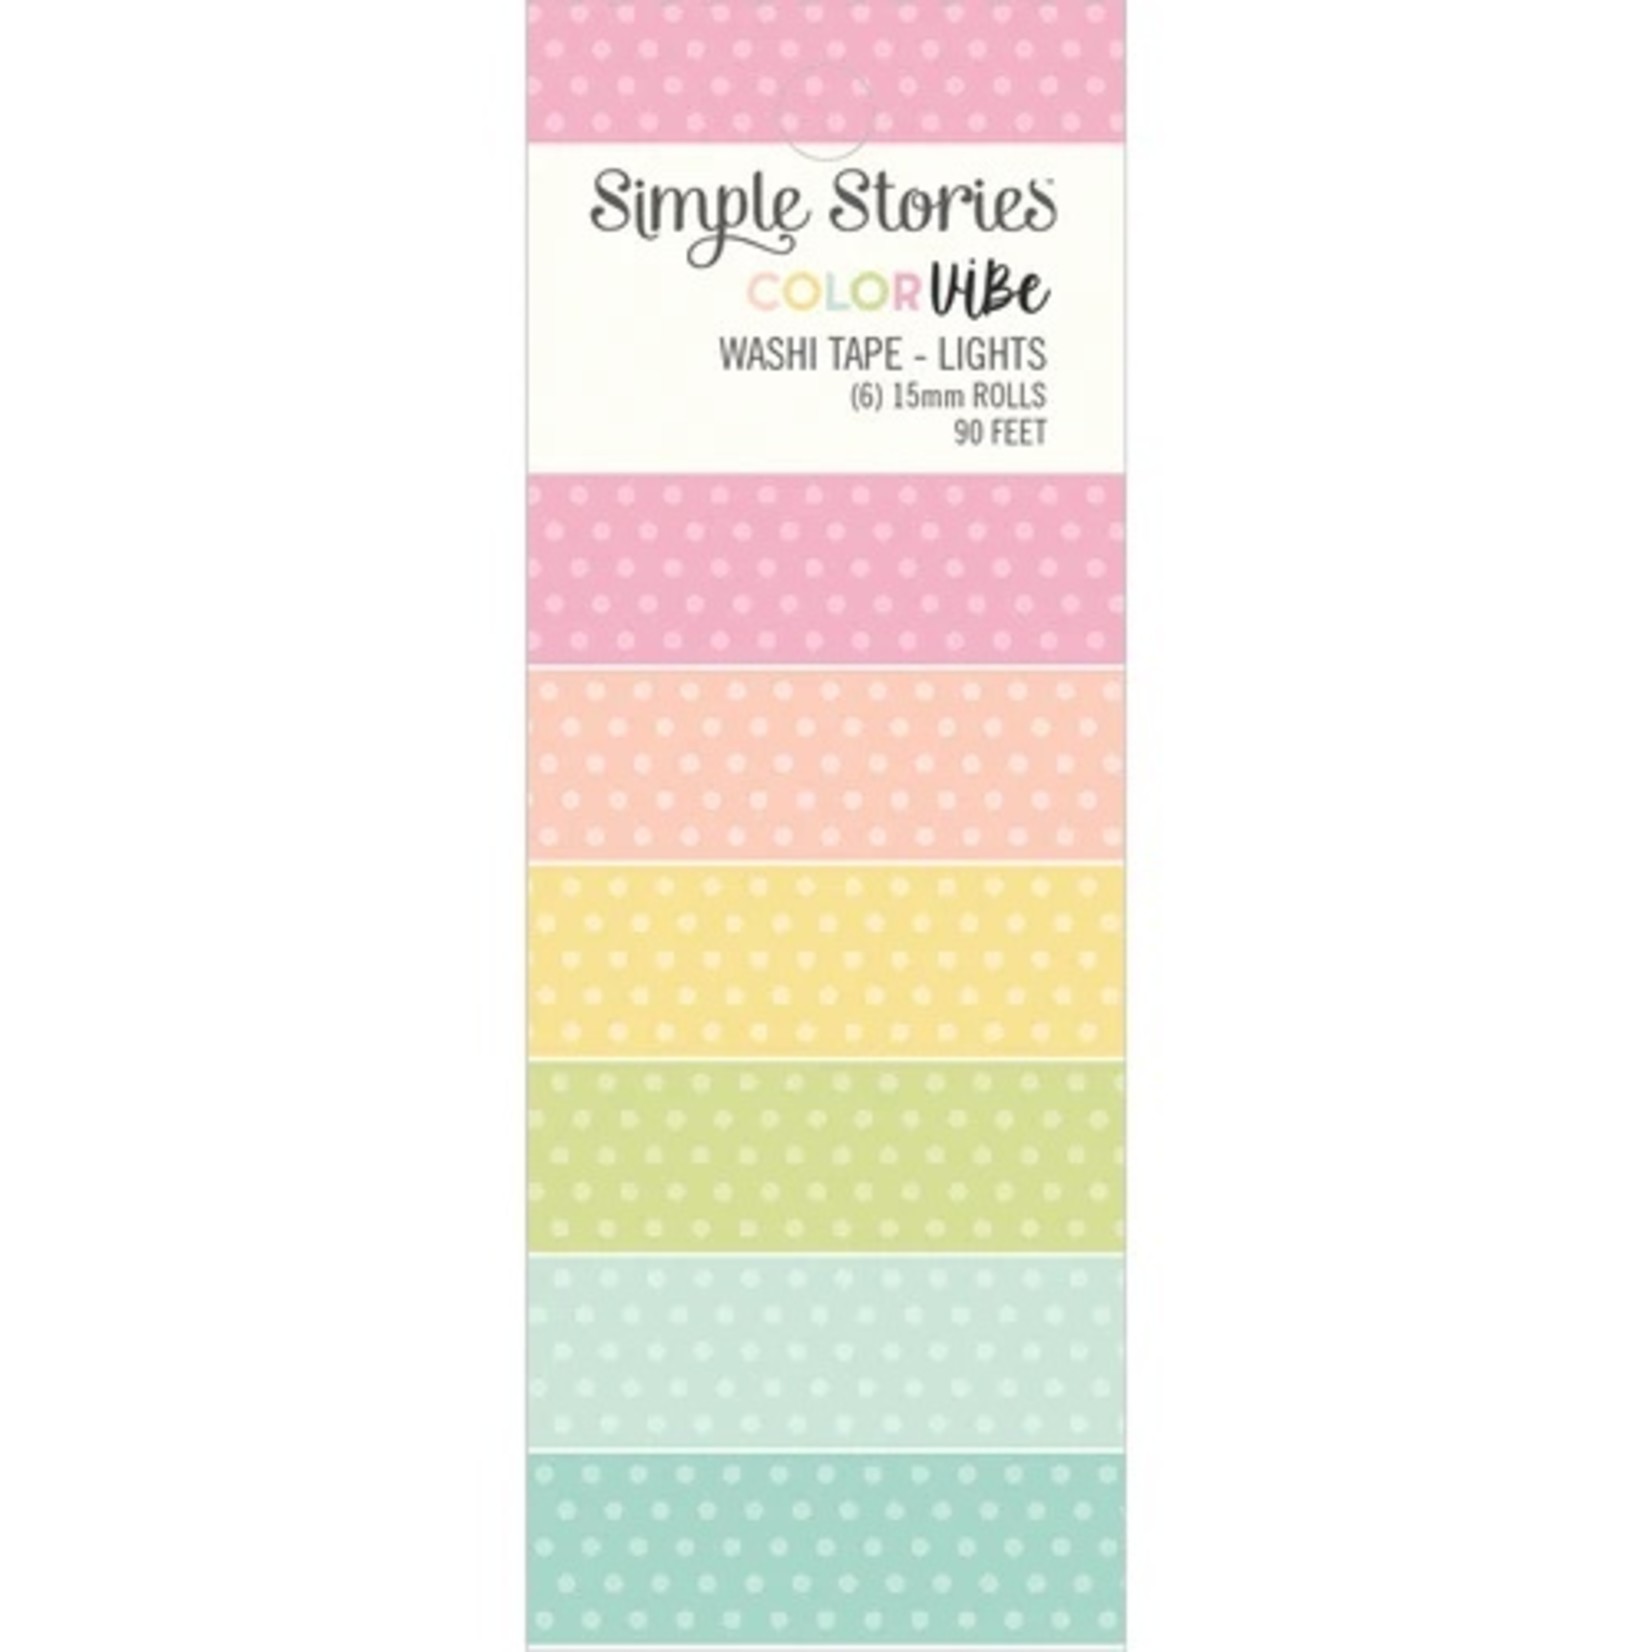 SIMPLE STORIES COLOR VIBE WASHI TAPE 15MMX9O' 6/PK LIGHTS